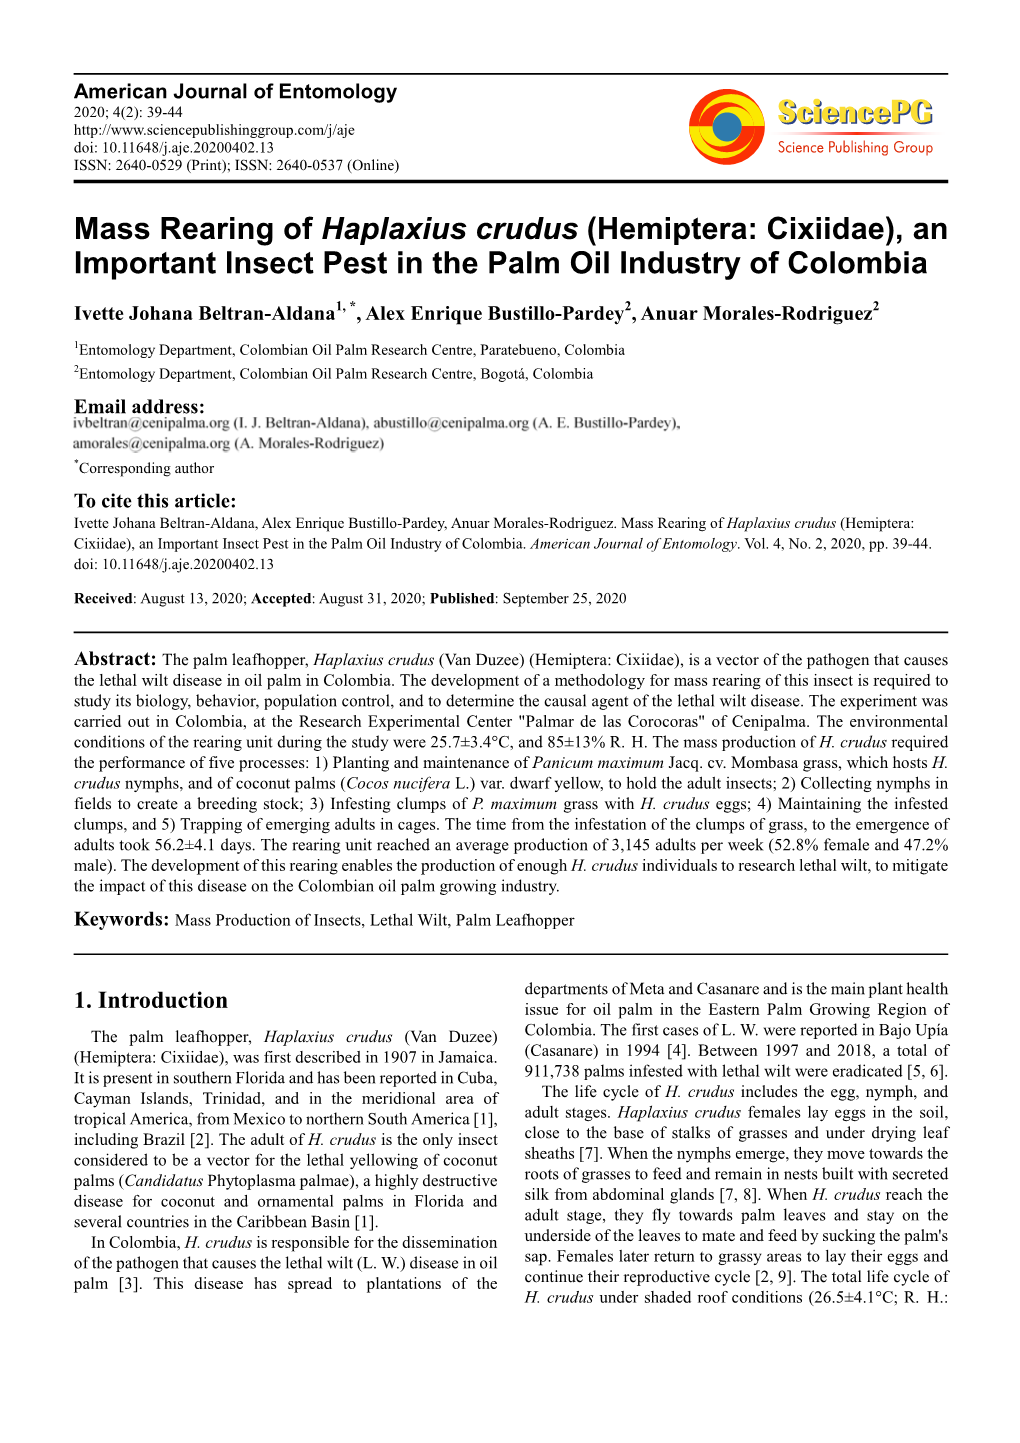 Mass Rearing of Haplaxius Crudus (Hemiptera: Cixiidae), an Important Insect Pest in the Palm Oil Industry of Colombia